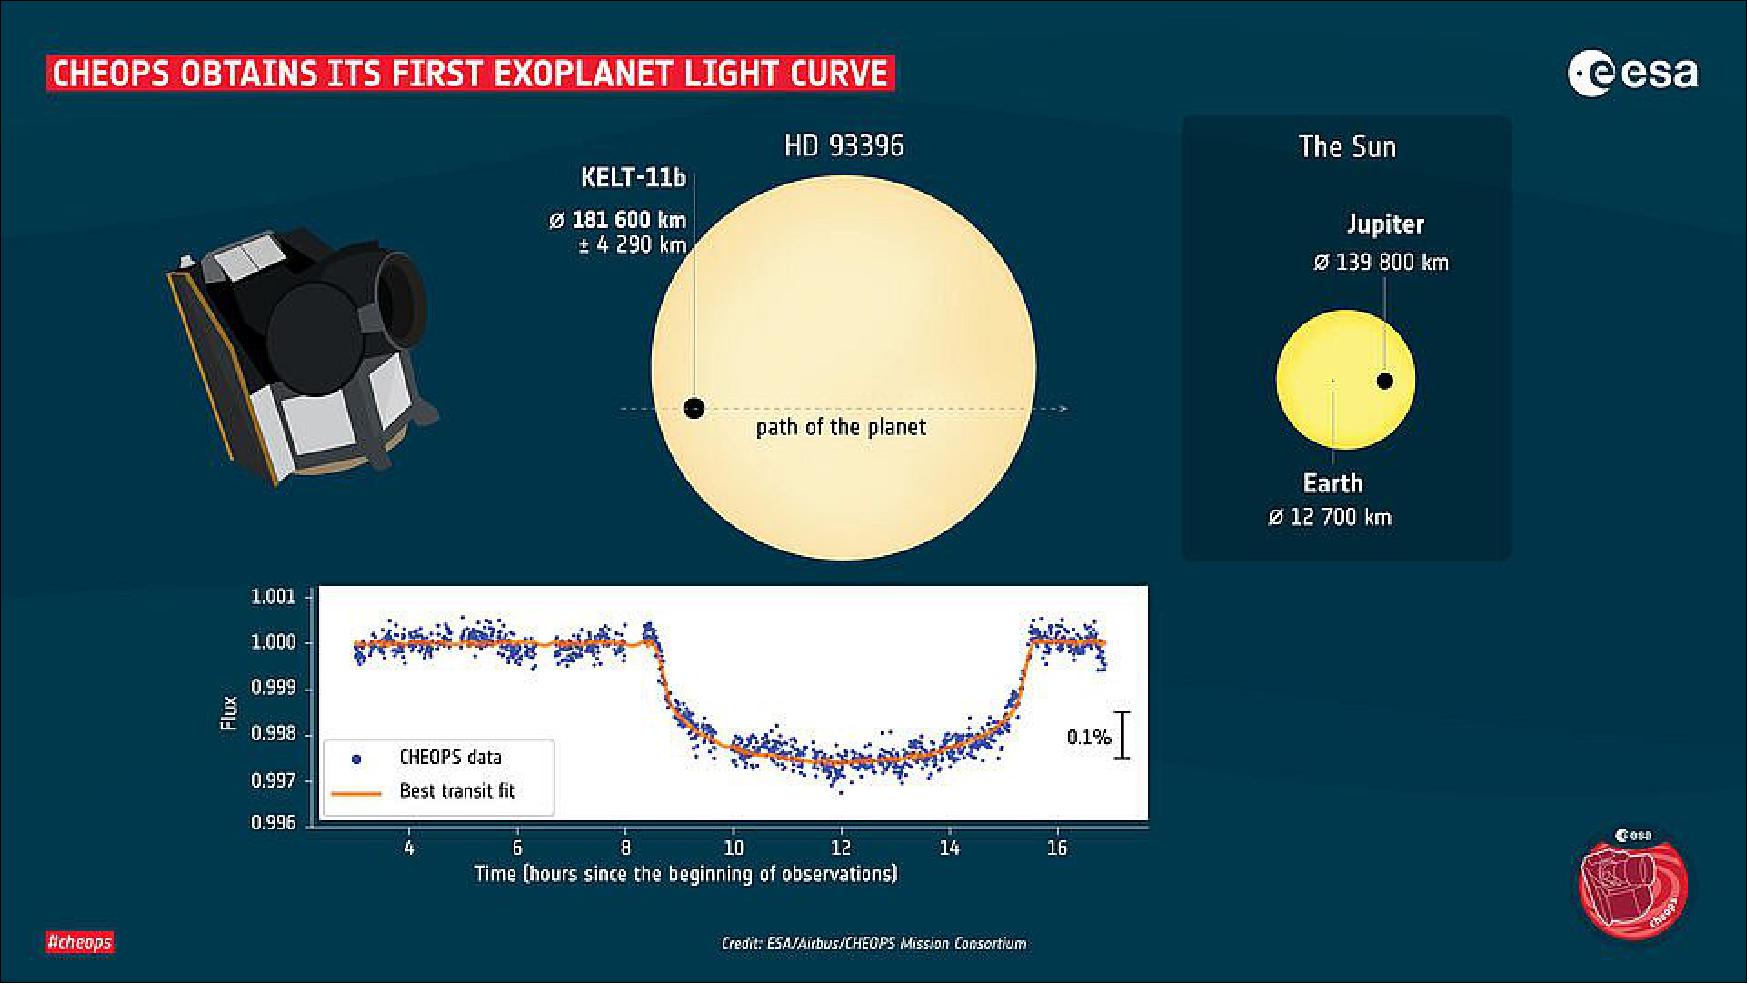 Figure 28: During its in-orbit commissioning, ESA's Cheops mission observed the transit of KELT-11b in front of its host star. HD 93396 is a subgiant yellow star located 320 light-years away, slightly cooler and three times larger than our Sun. It hosts a puffy gaseous planet, KELT-11b, about 30% larger in size than Jupiter, in an orbit that is much closer to the star than Mercury is to the Sun. - The light curve of this star shows a clear dip caused by the eight hour-long transit of KELT-11b, which enabled scientists to determine very precisely the diameter of the planet: 181,600 km – with an uncertainty just under 4300 km. The measurements made by Cheops are five times more accurate than those from Earth, providing a taster for the science to come from the Cheops mission. In this graphic, the Sun is shown as a comparison, along with the diameter of Earth and Jupiter (calculated from the mean volumetric radius), image credit: ESA/Airbus/CHEOPS Mission Consortium